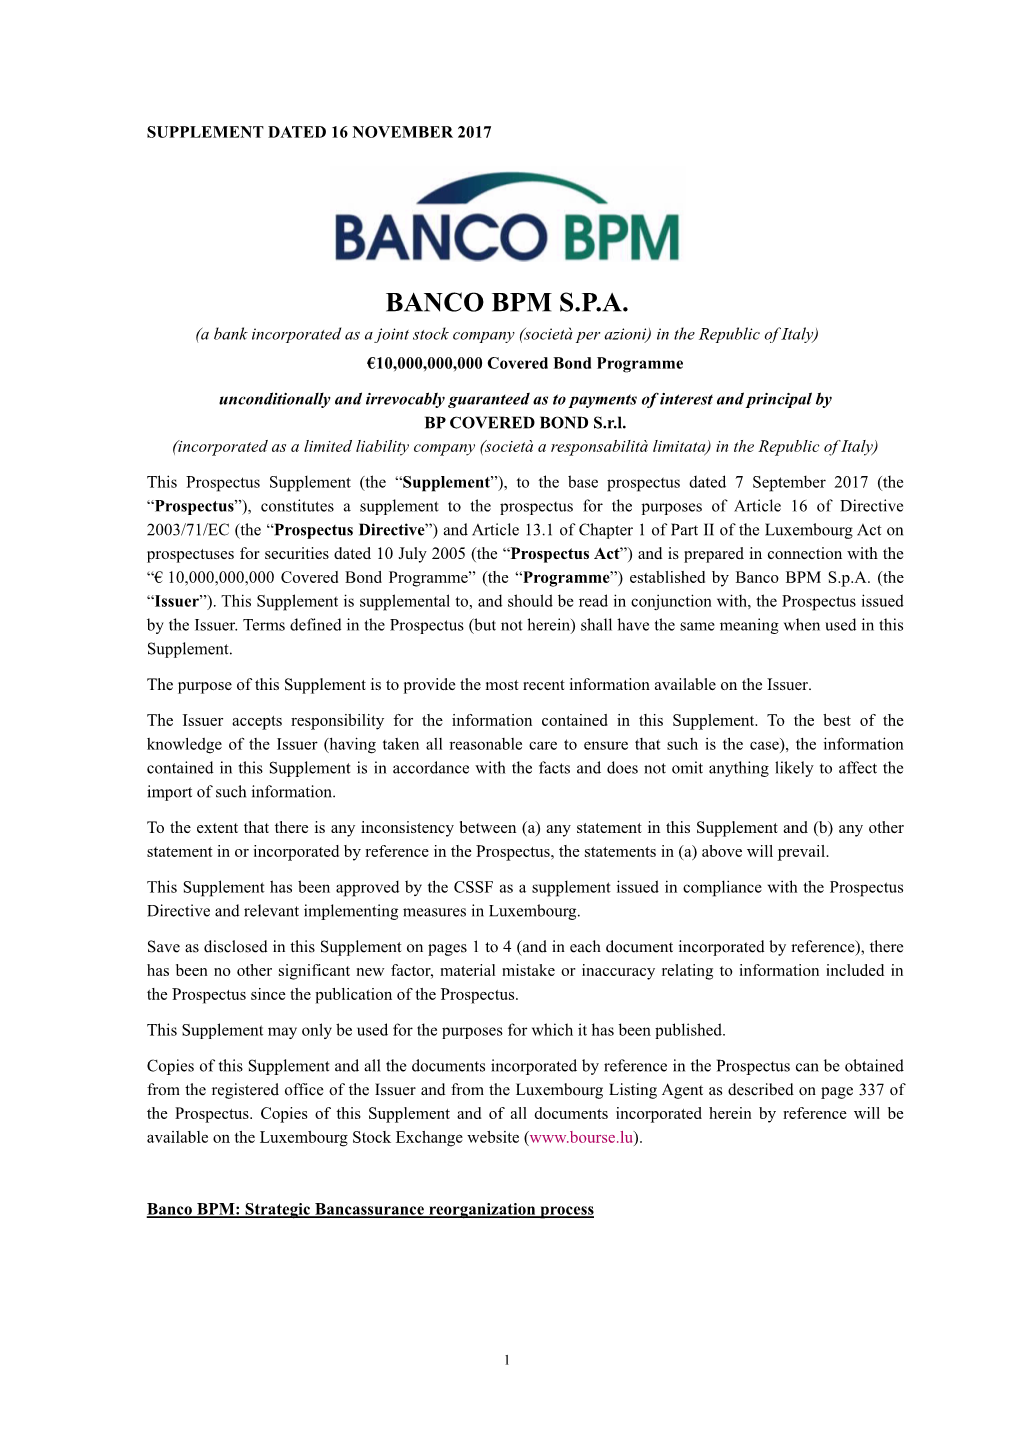 BANCO BPM S.P.A. (A Bank Incorporated As a Joint Stock Company (Società Per Azioni) in the Republic of Italy) €10,000,000,000 Covered Bond Programme